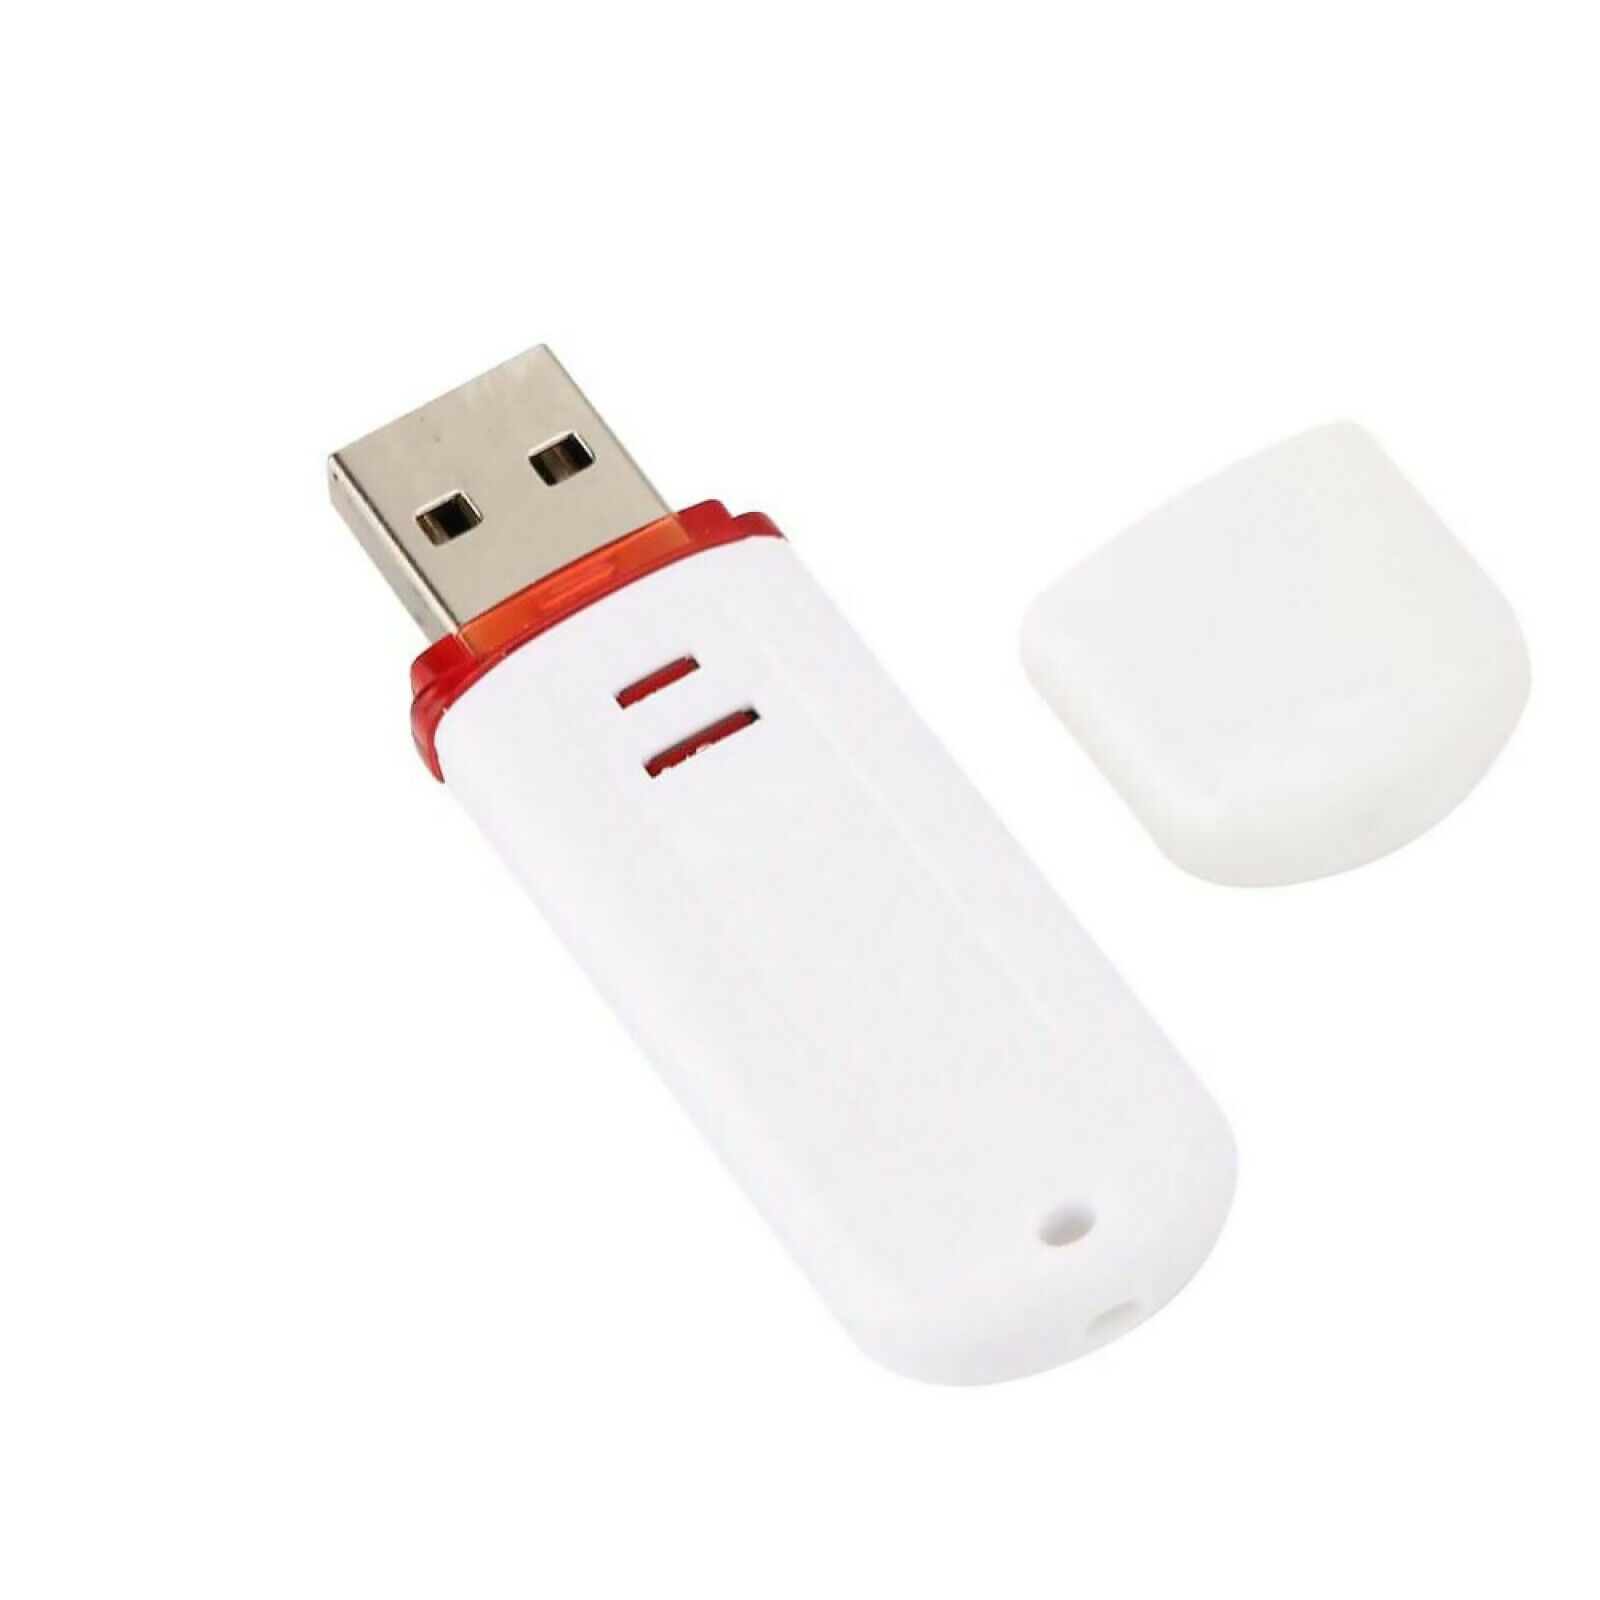 Mini Portable WiFi USB HID Injector Rubberducky On Steroids Dongle Adapter